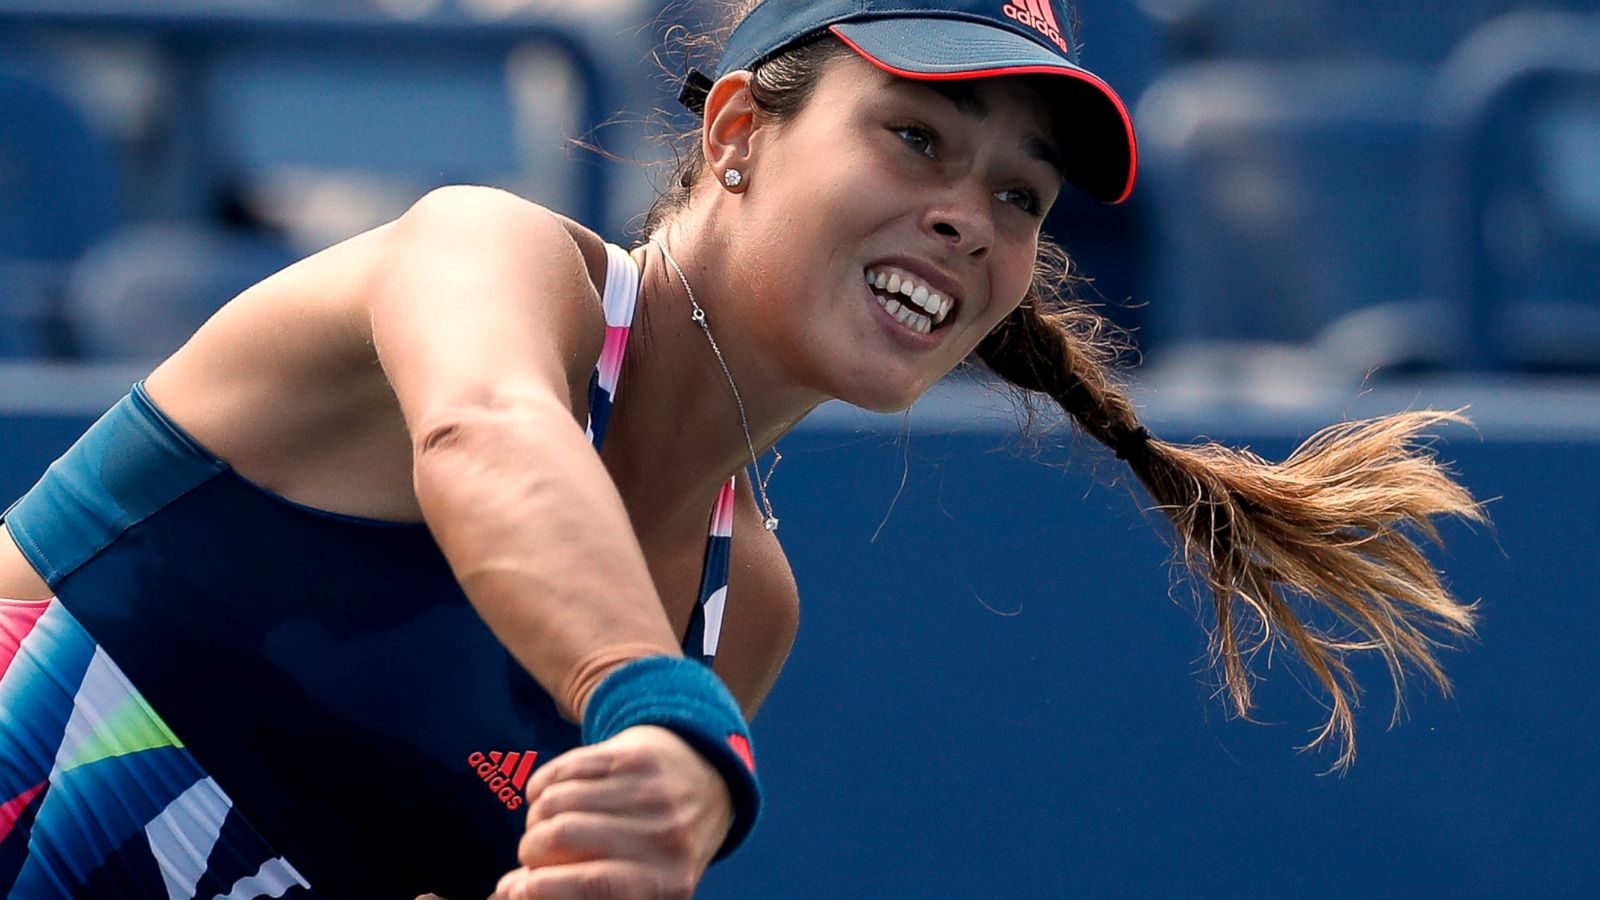 Former Top Tennis Player Ana Ivanovic Retires from Tennis